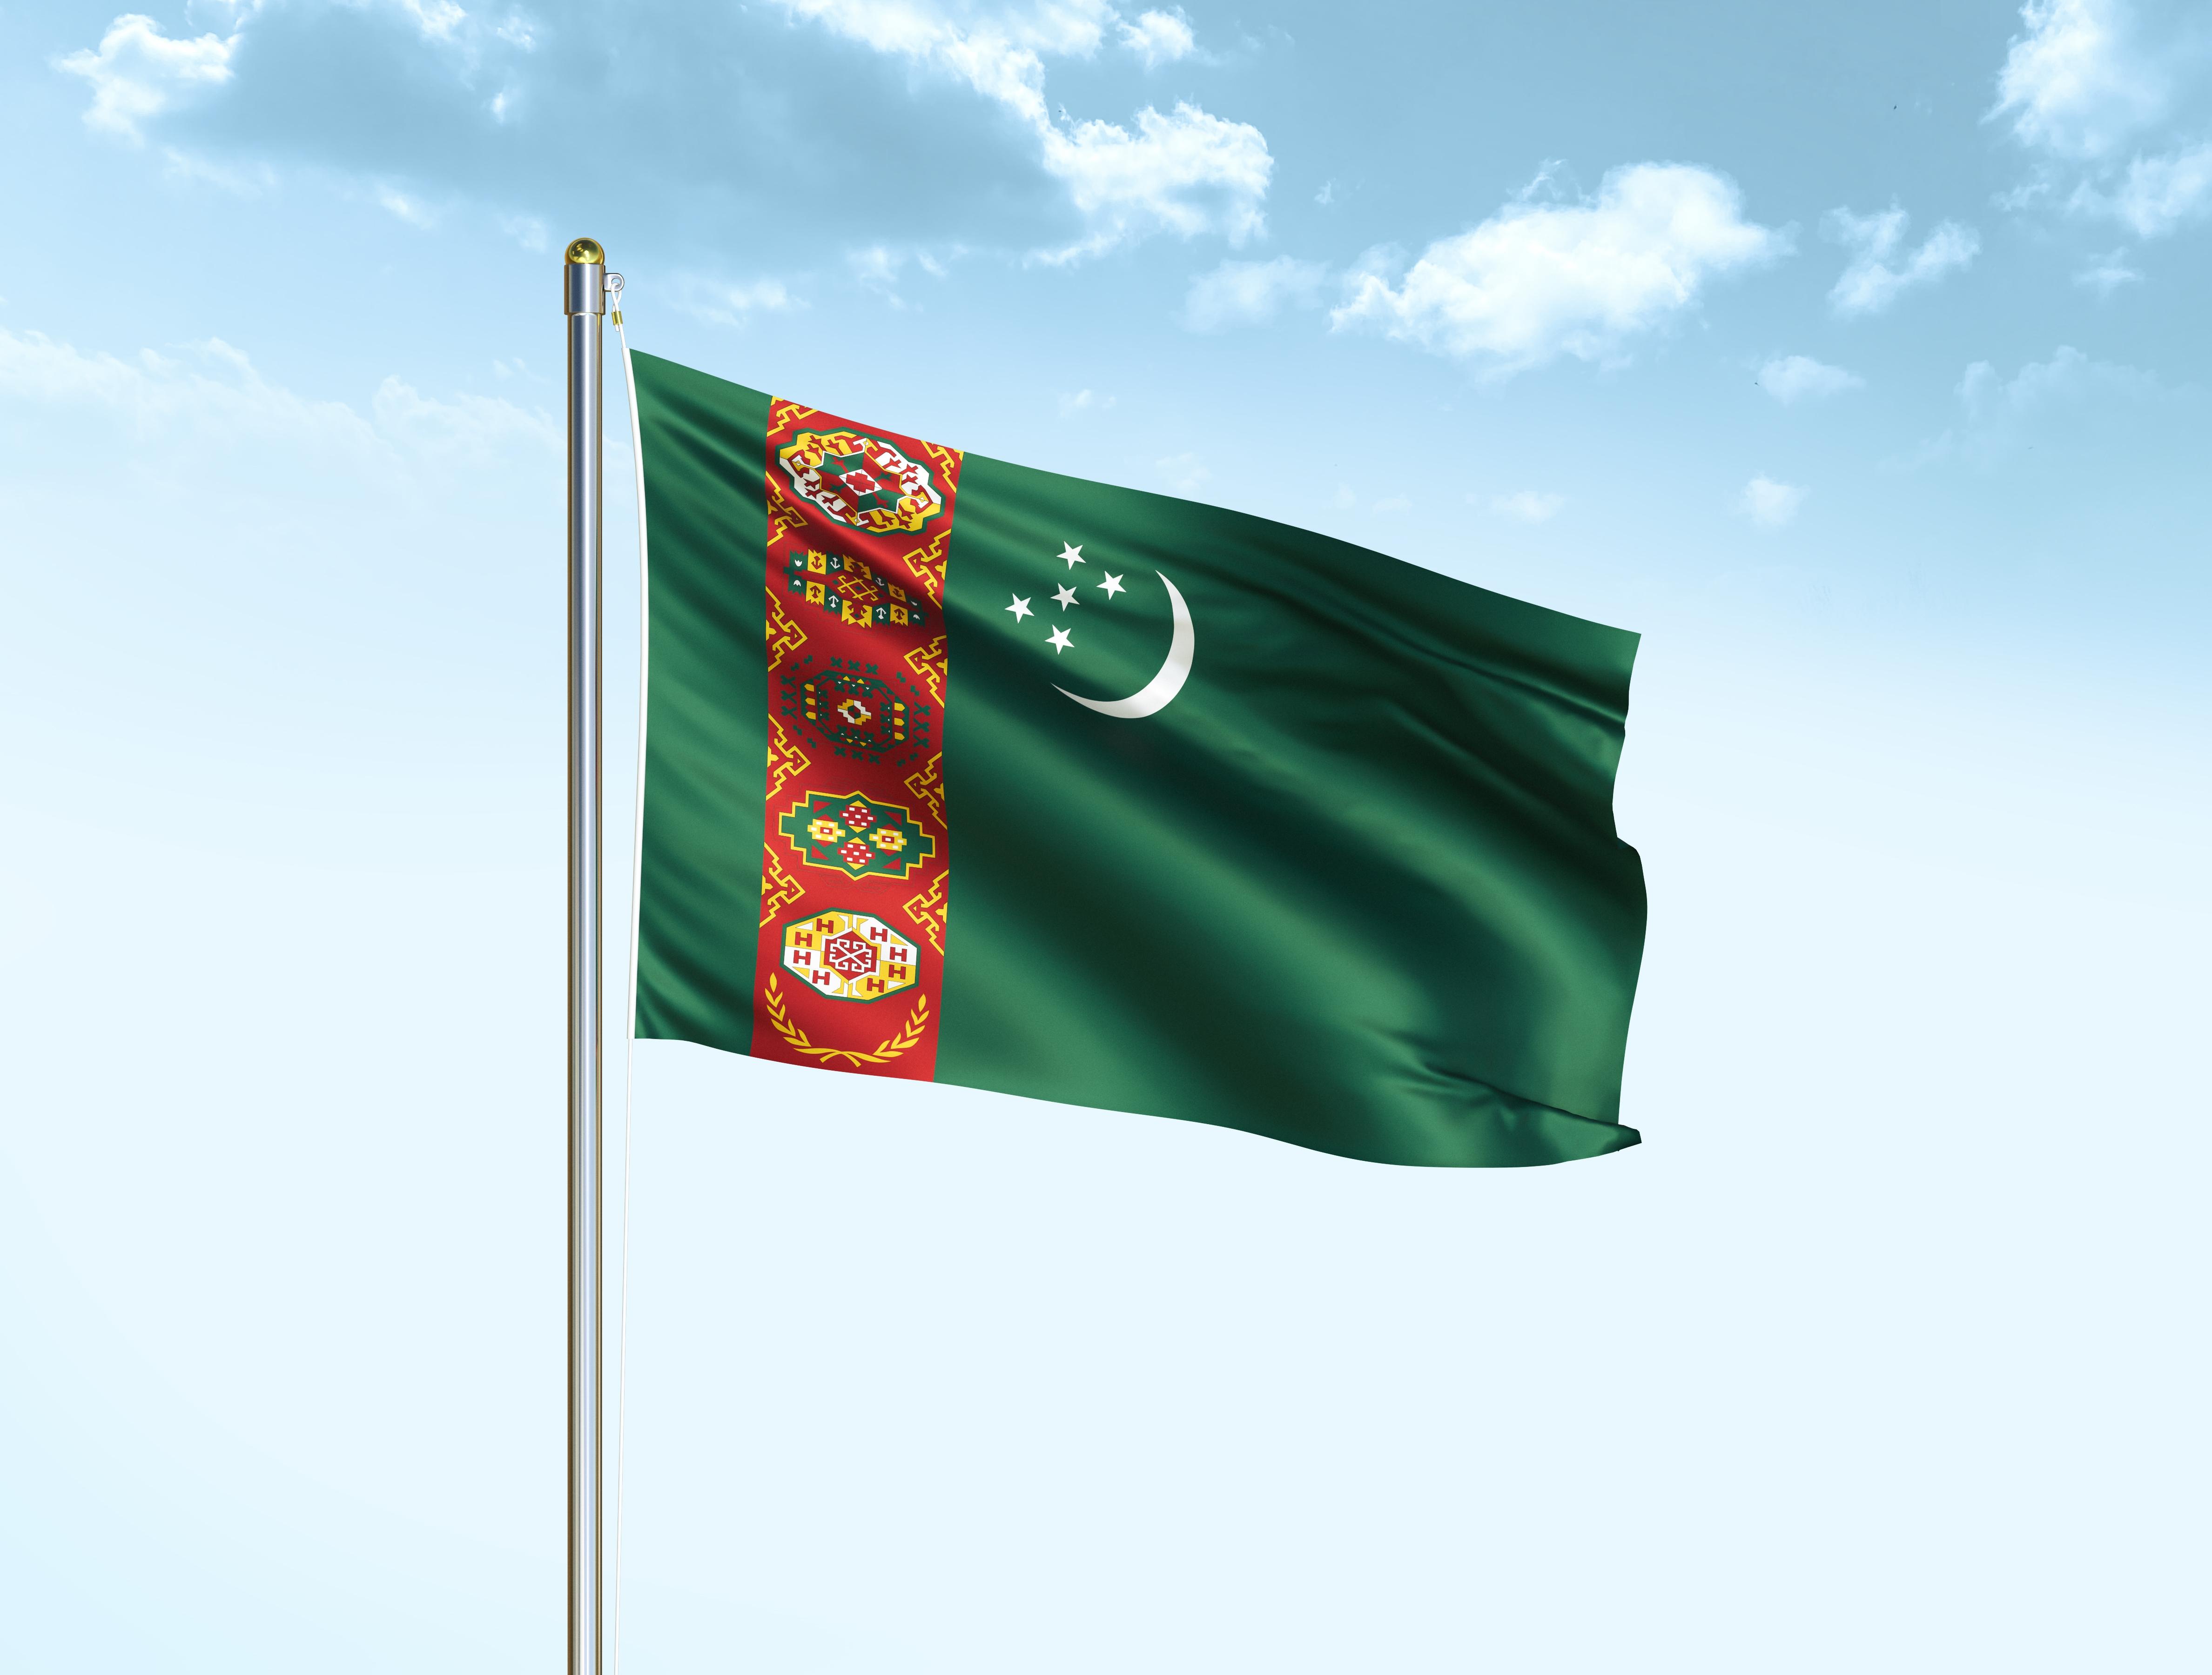 The flag of Turkmenistan is proudly displayed atop the towering flagpole. © M_Videous / Shutterstock